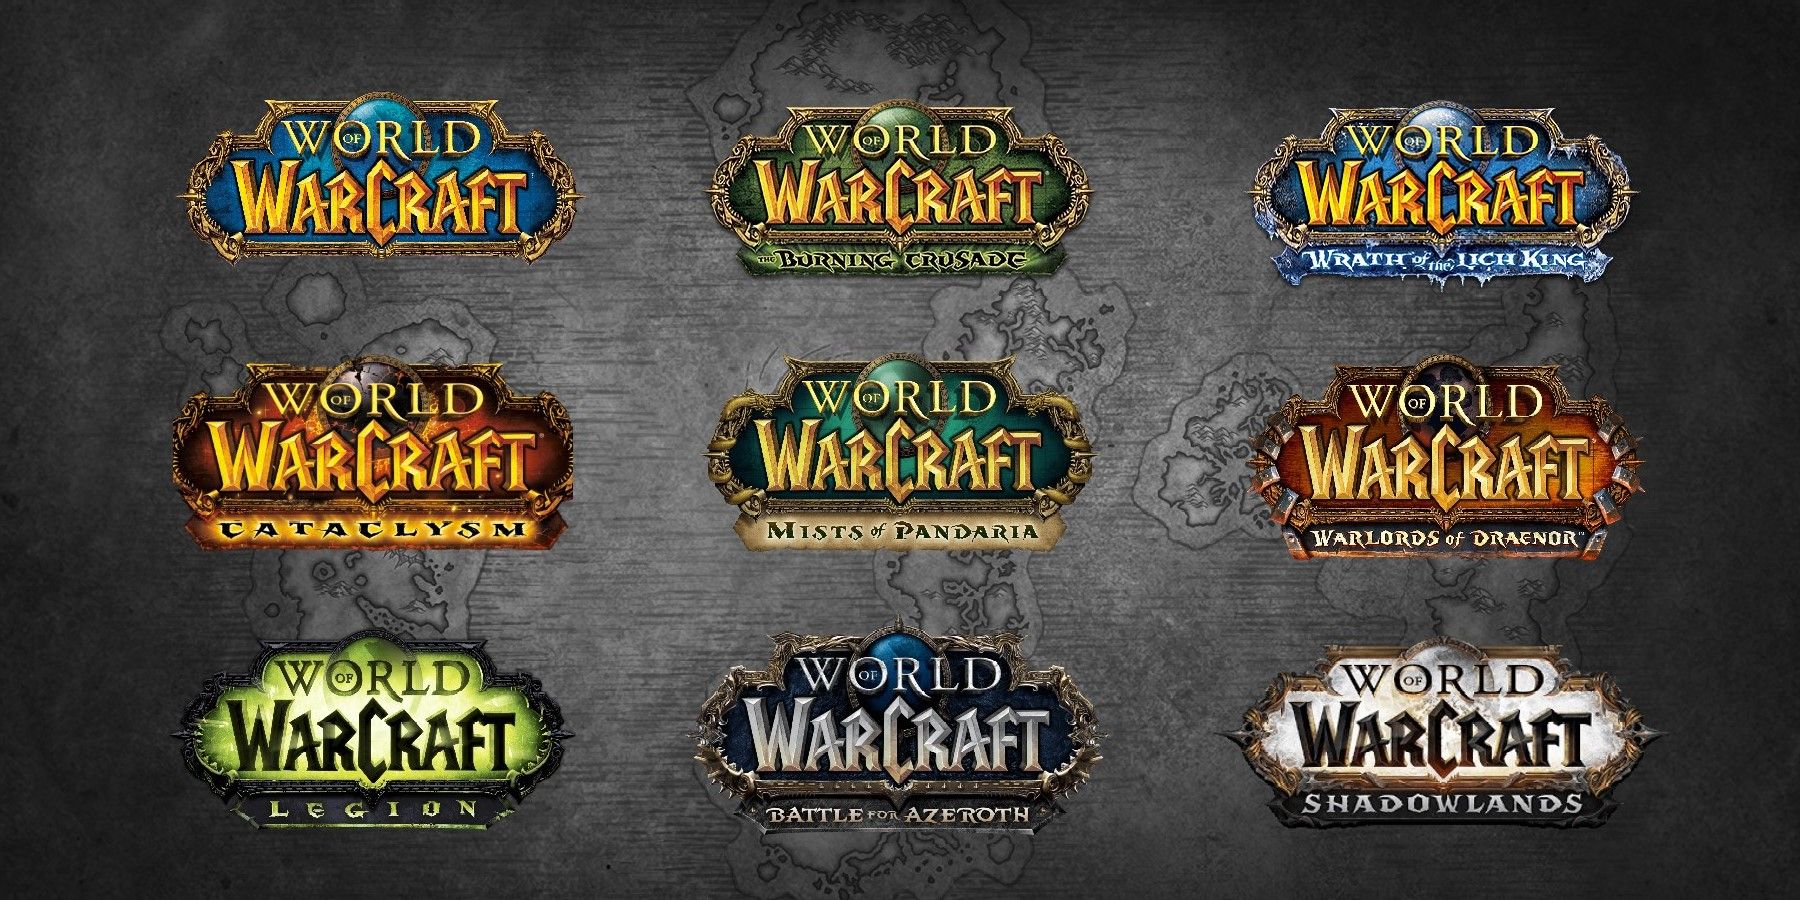 World of Warcraft Fan Shares Chart Comparing Patch Length Through History